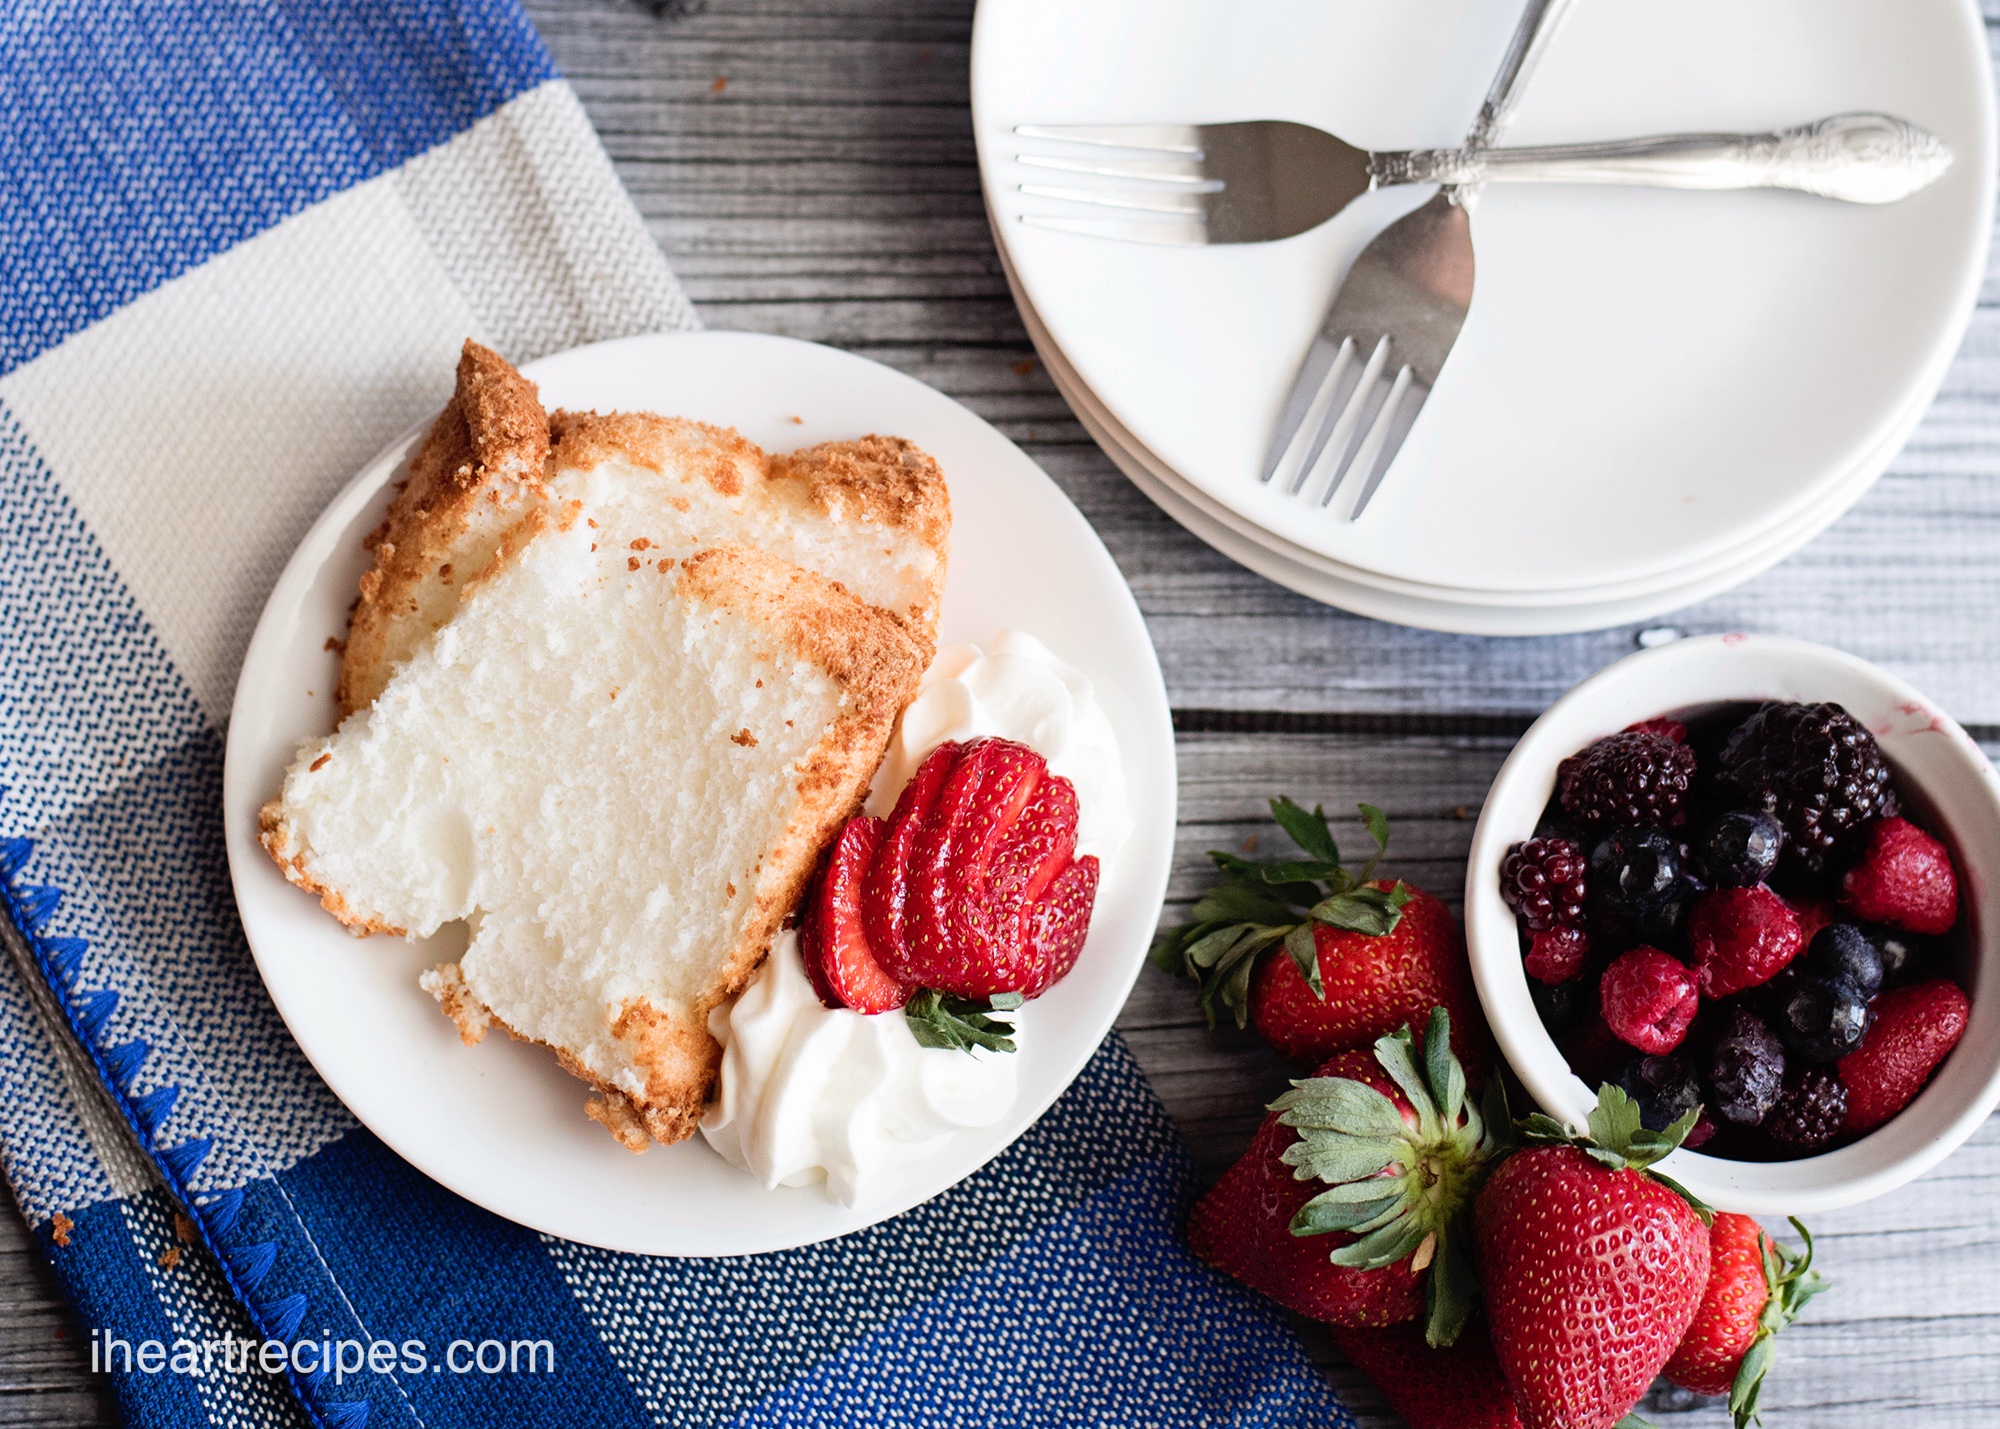 Slices of homemade angel food cake served with fresh berries and whipped cream.